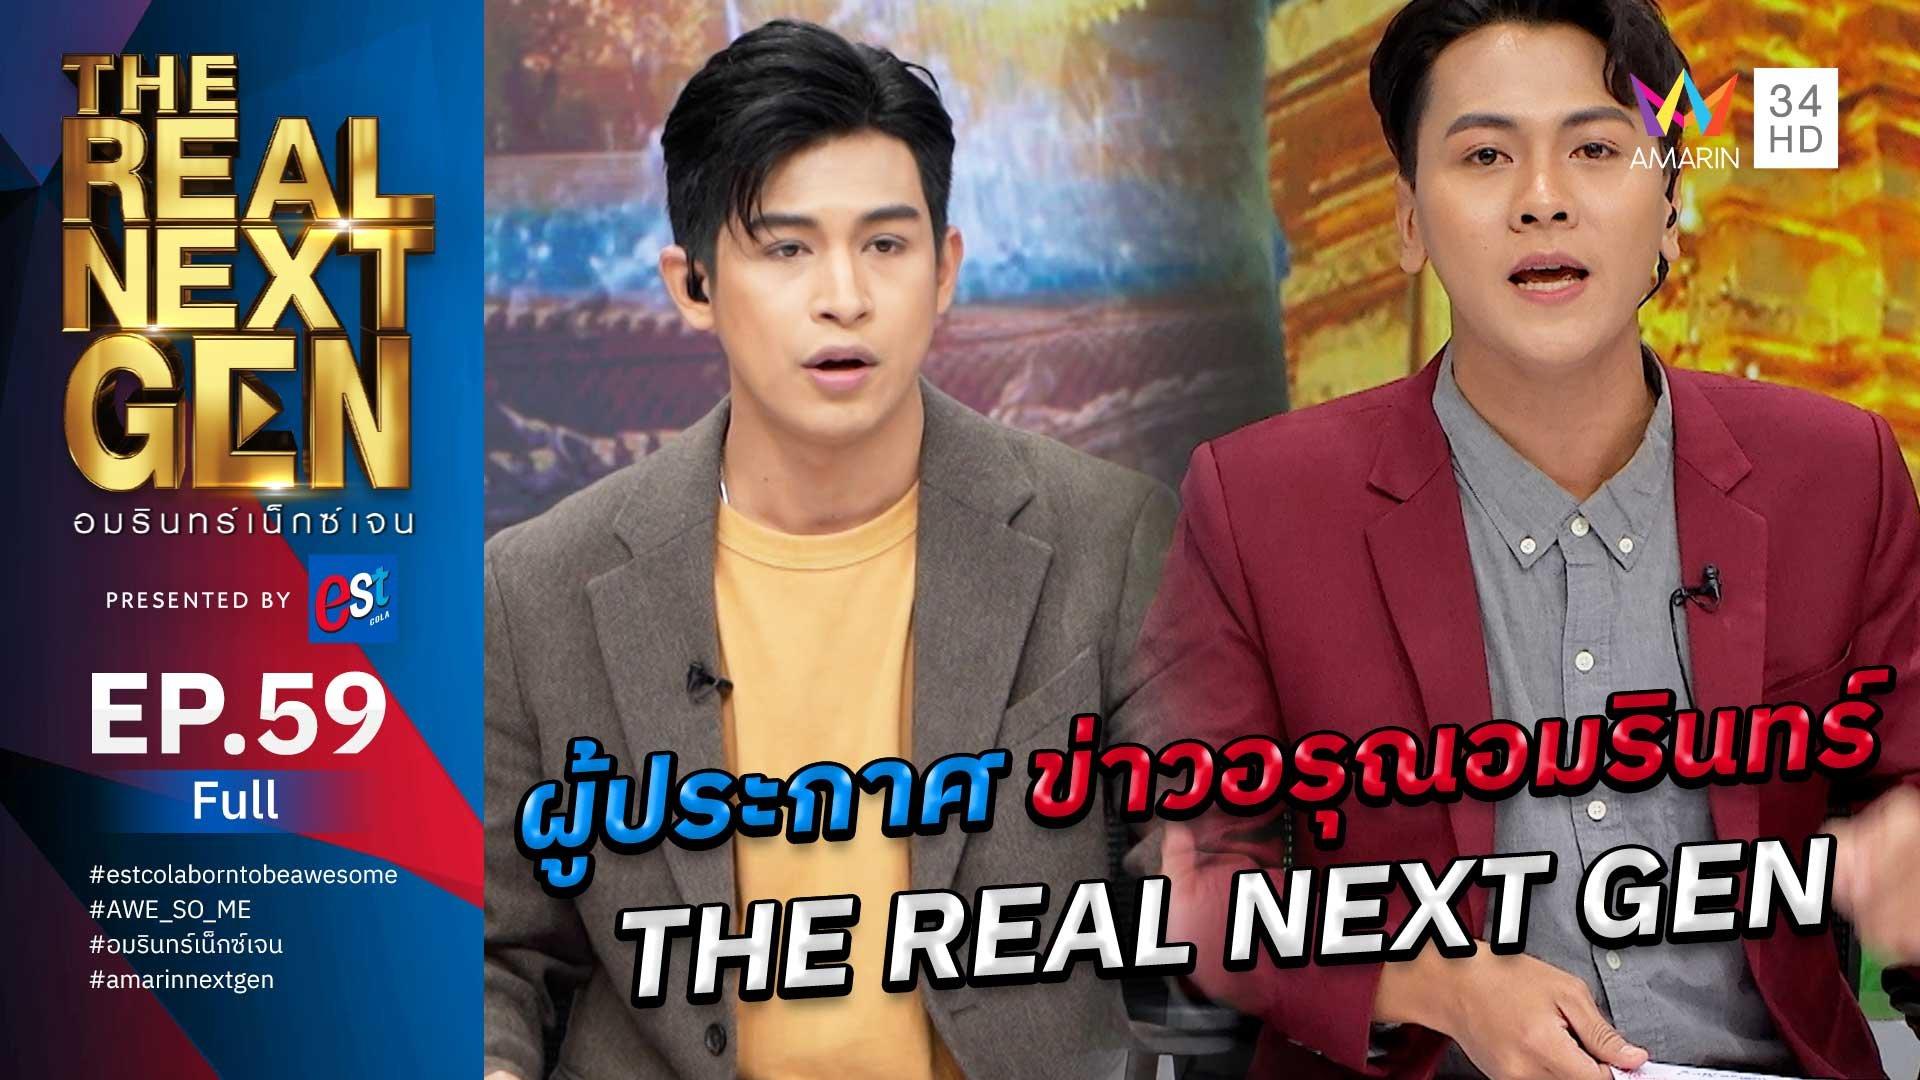 The Real Next Gen อมรินทร์เน็กซ์เจน | EP.59 THE REAL NEXT GEN อมรินทร์เน็กซ์เจน Presented By est cola  | 7 ธ.ค. 66 | AMARIN TVHD34